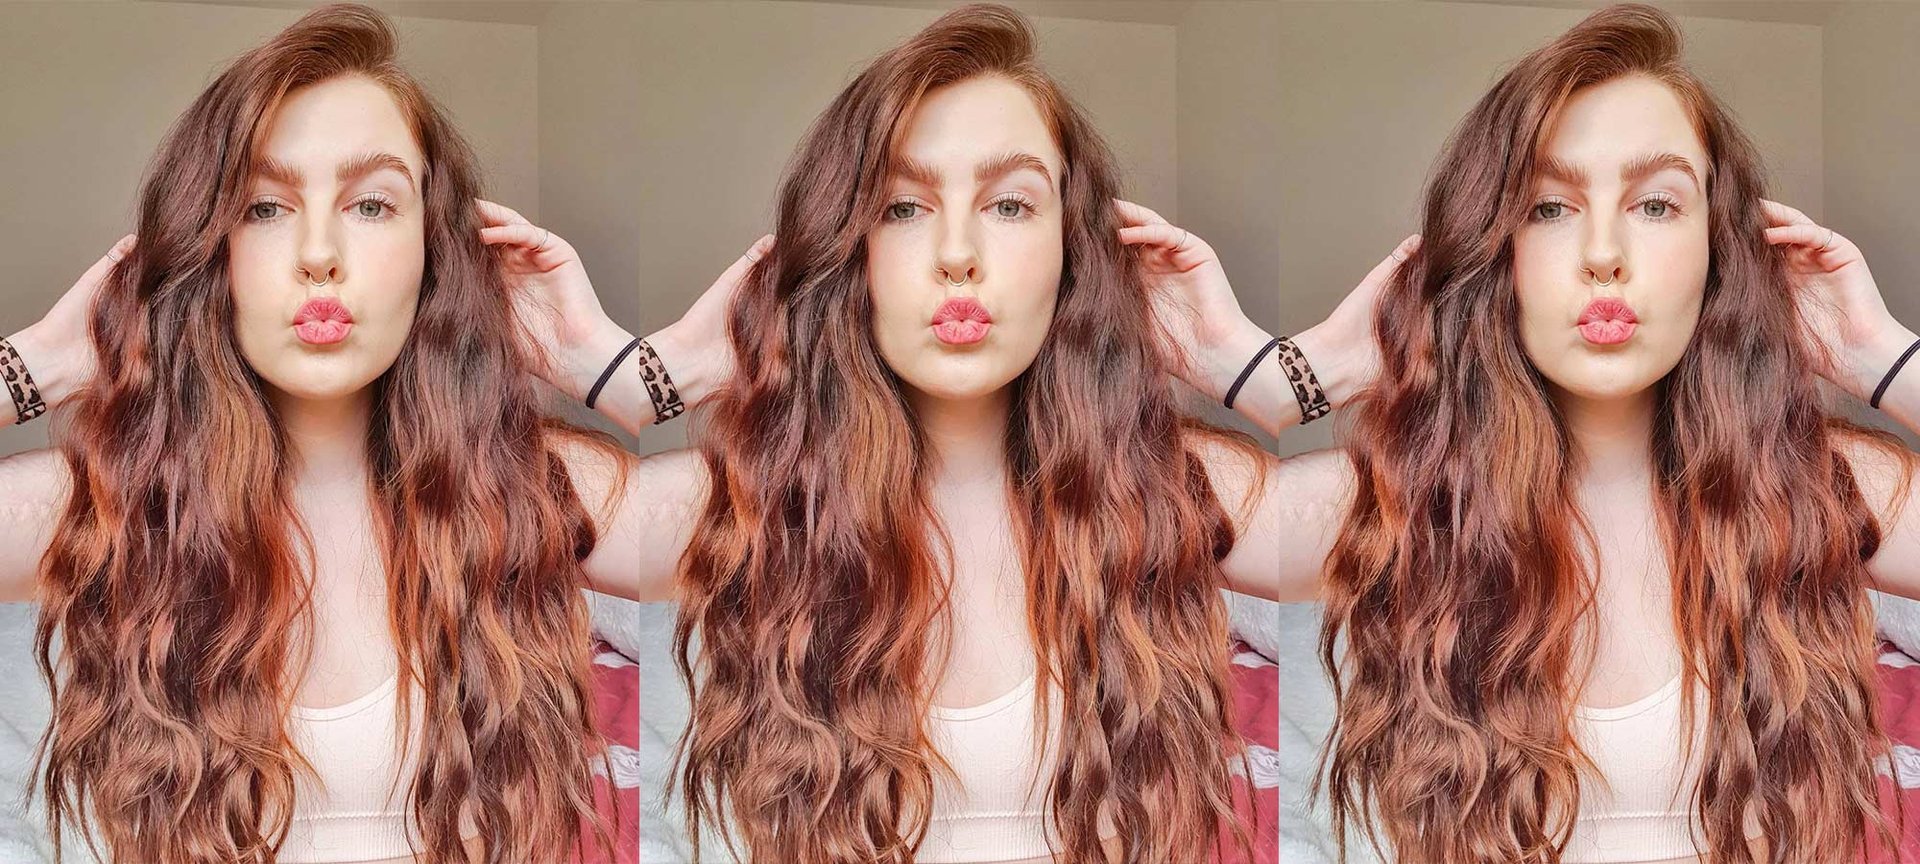 7 Mermaid Waves Hairstyles To Try Right Now - L’Oréal Paris